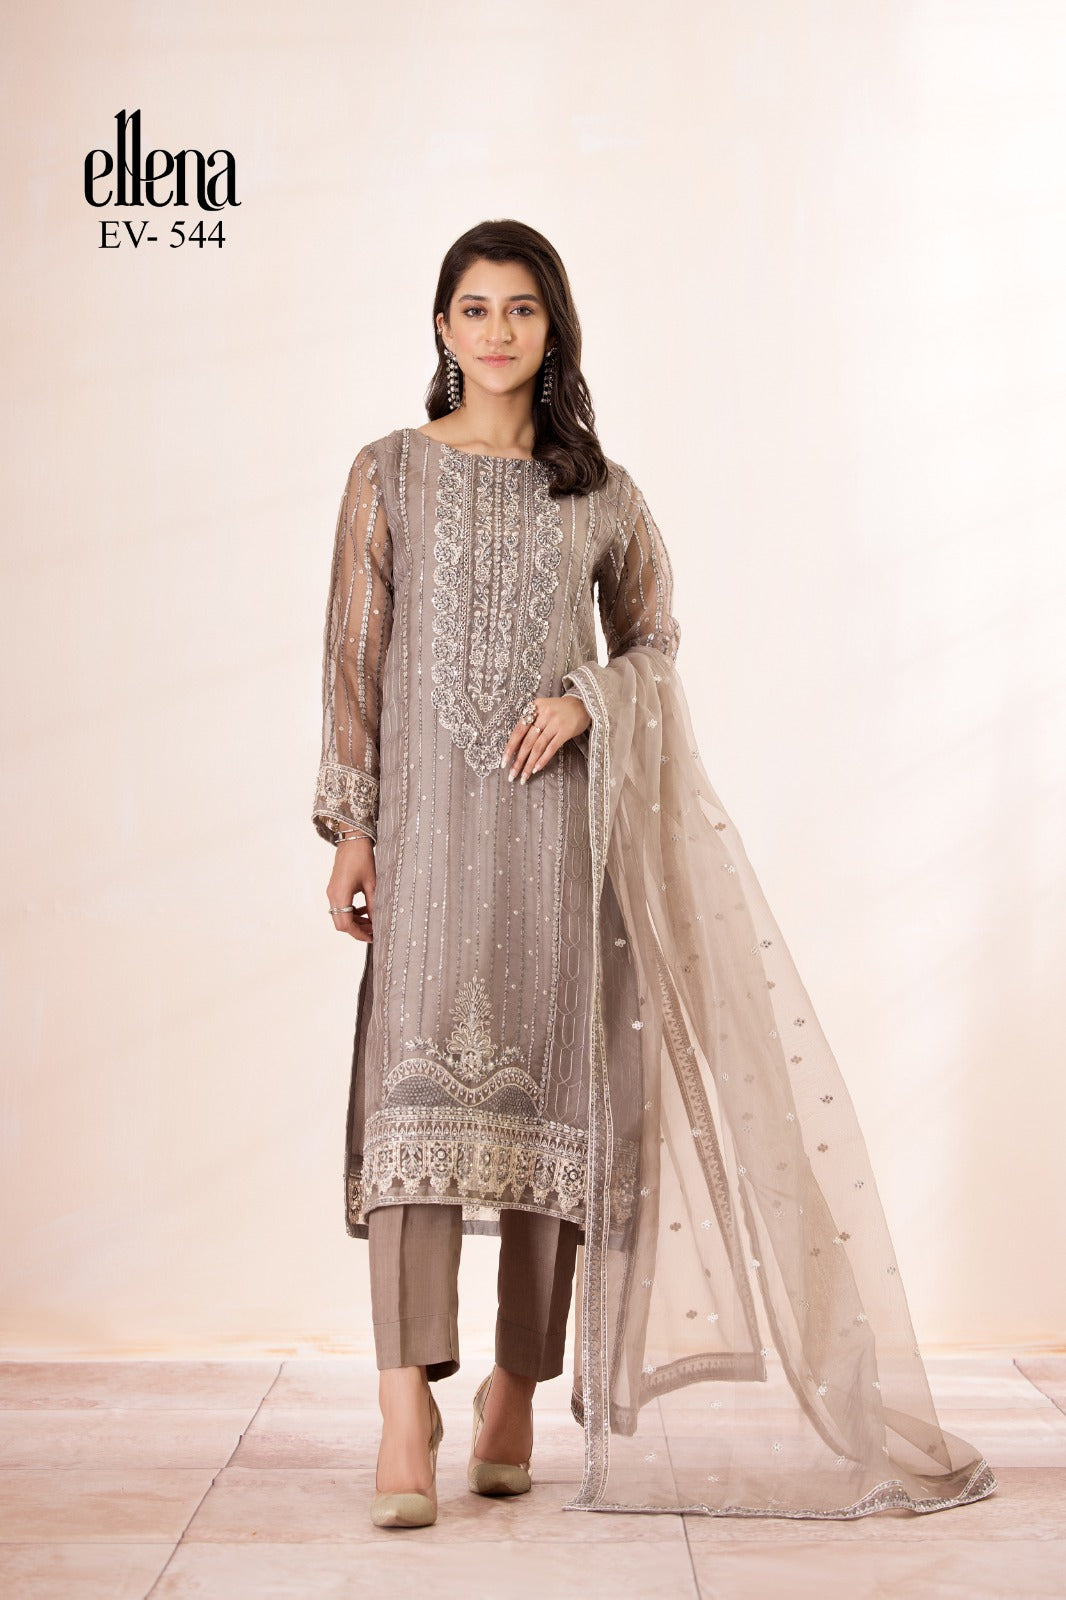 Elena 3-PC Stitched Embroidered Suit EV-544